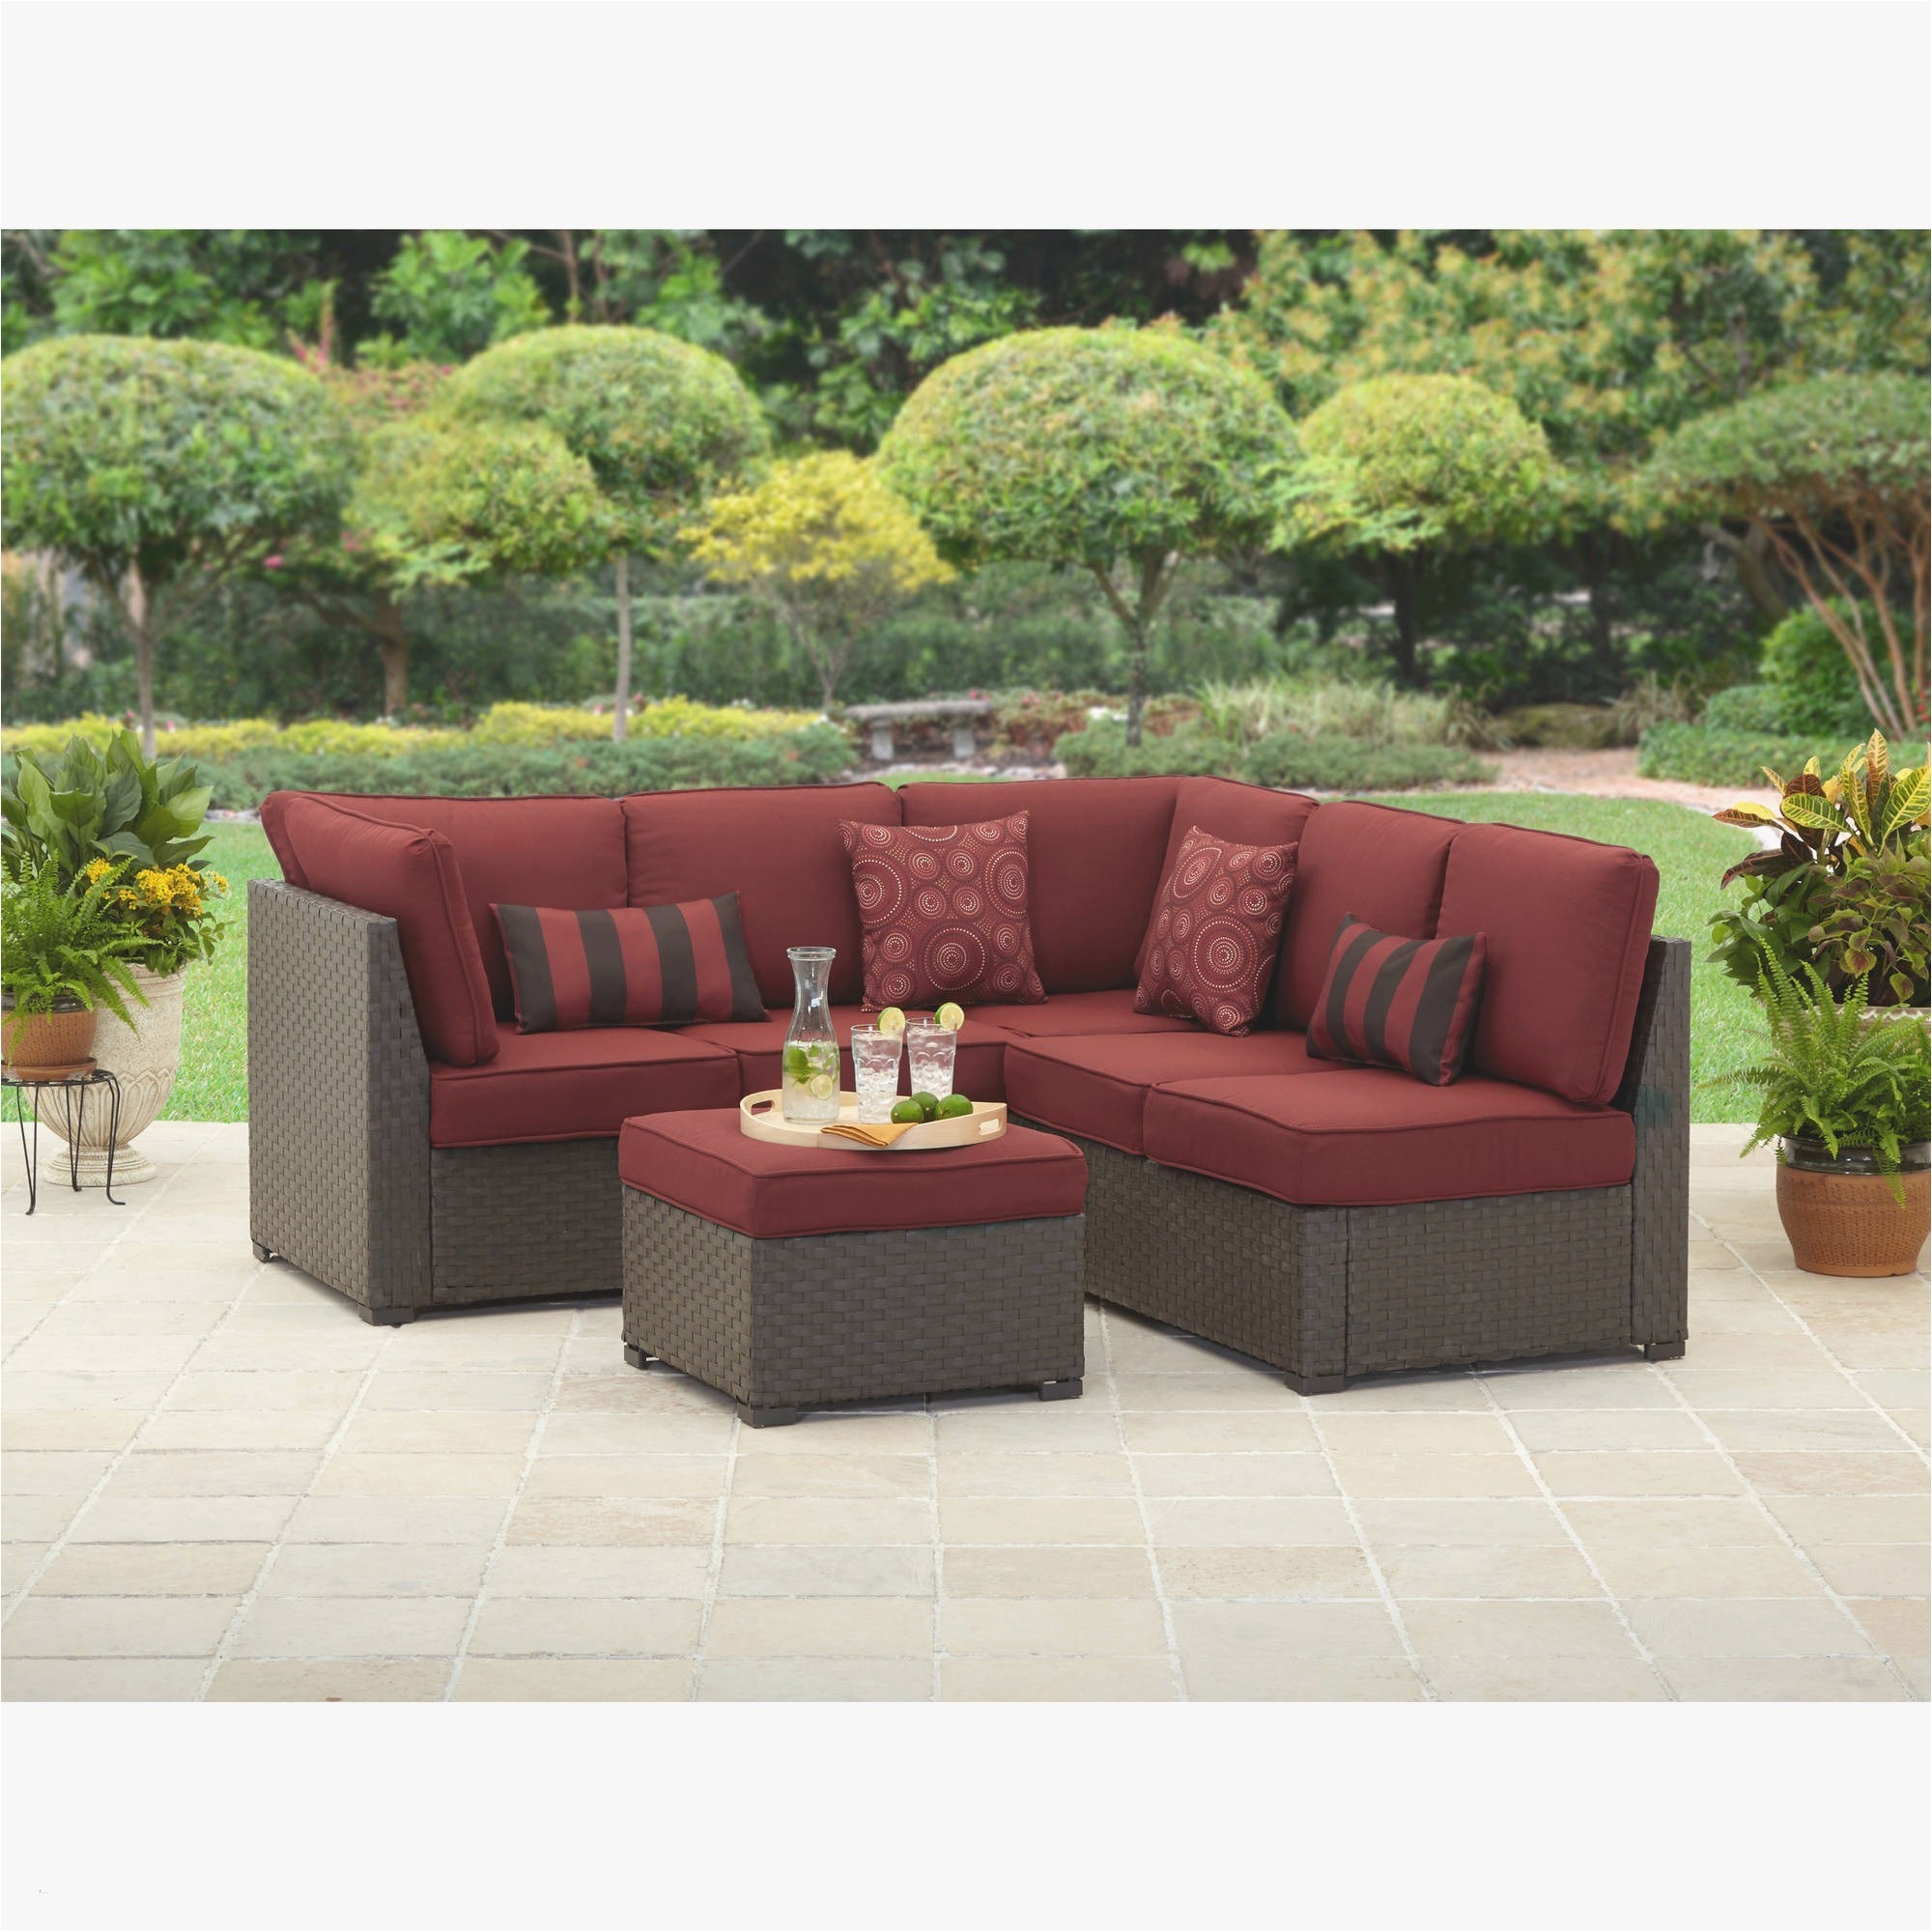 41 stunning walmart cushions for outdoor furniture everywhere and we love it outdoor design interior